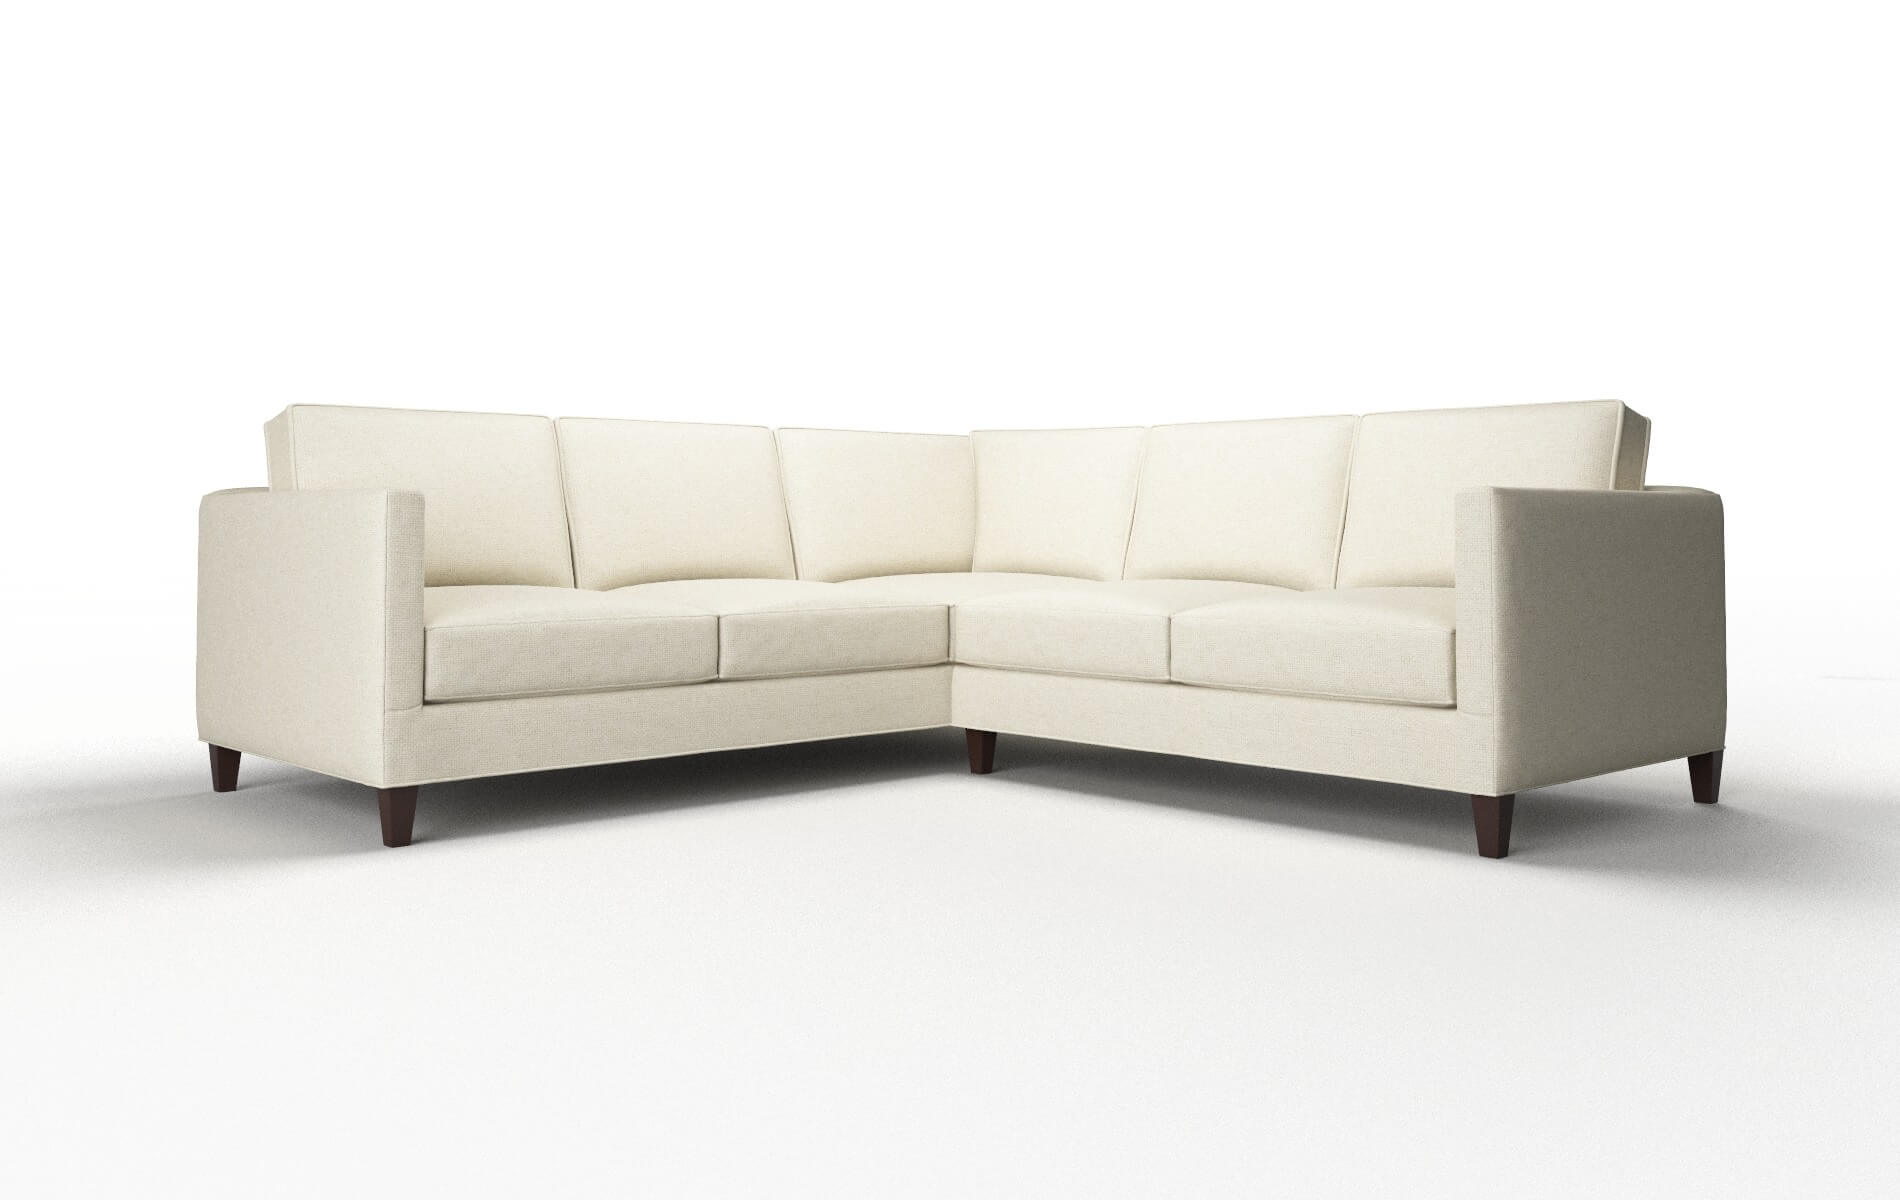 Alps Redondo Oyster Sectional espresso legs